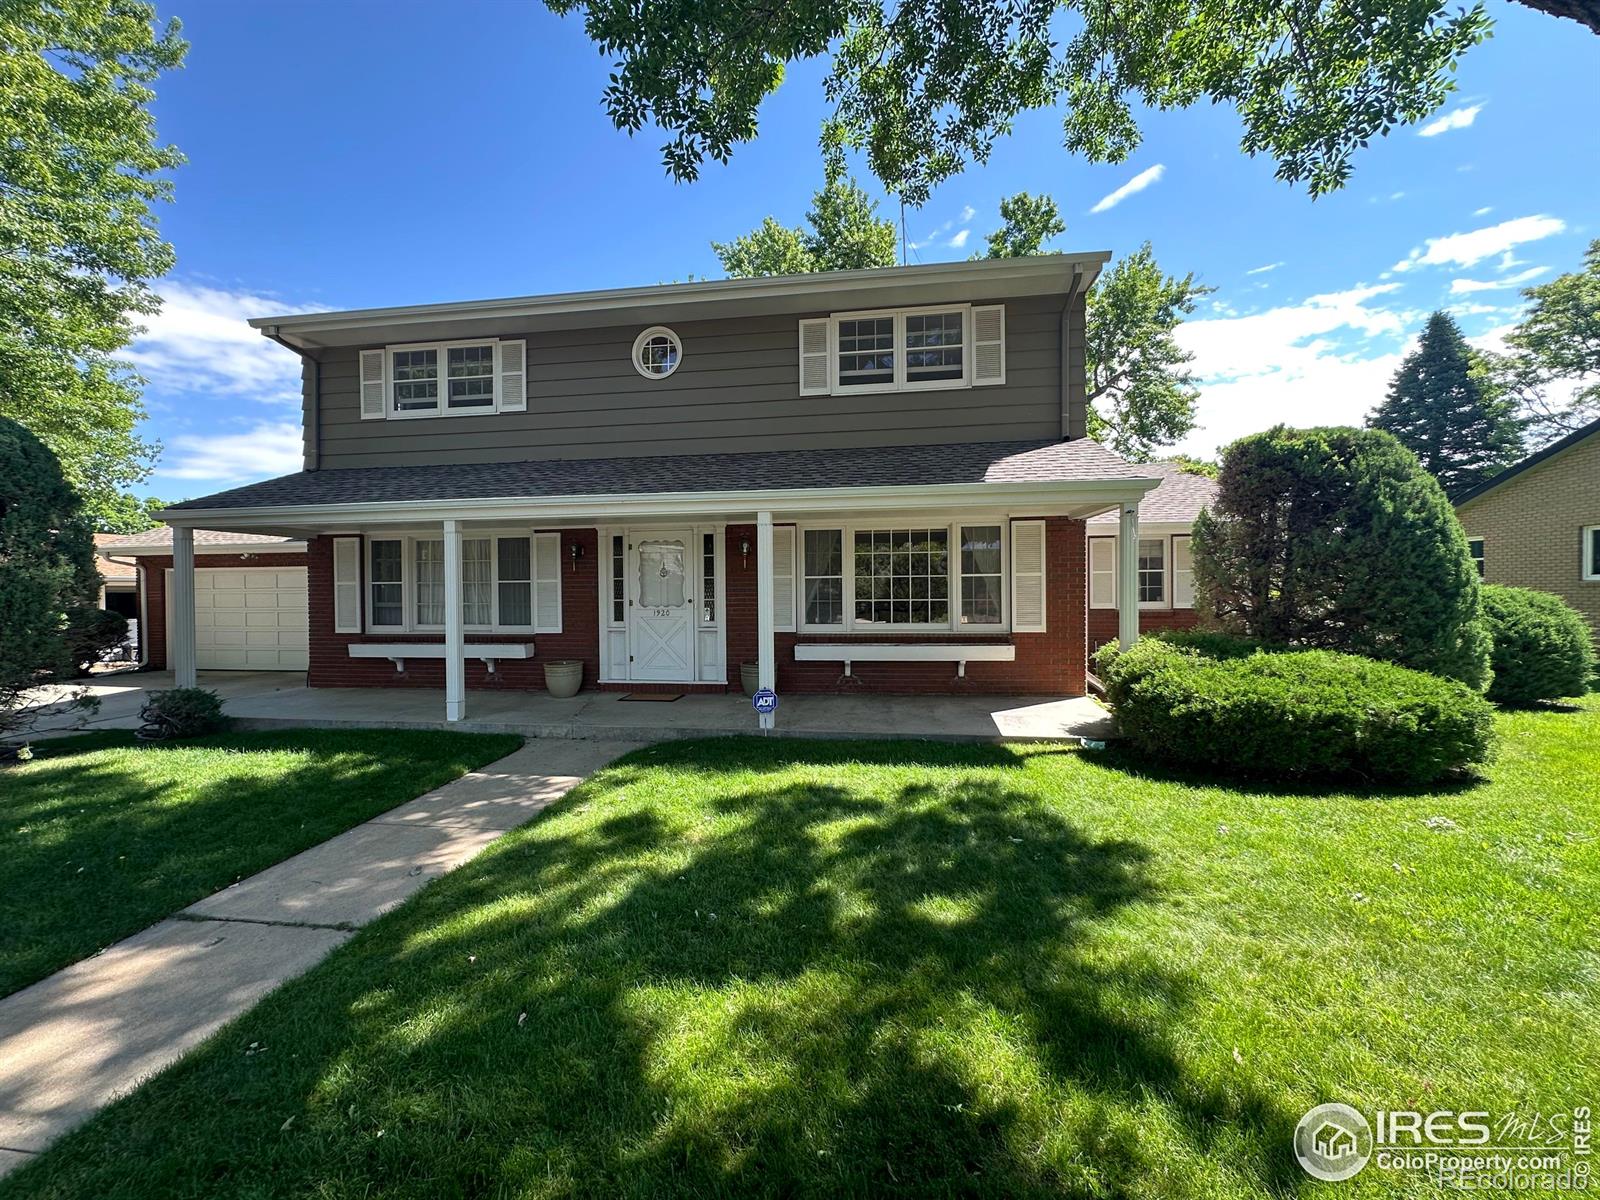 1920  25th Avenue, greeley MLS: 4567891010917 Beds: 5 Baths: 4 Price: $549,000